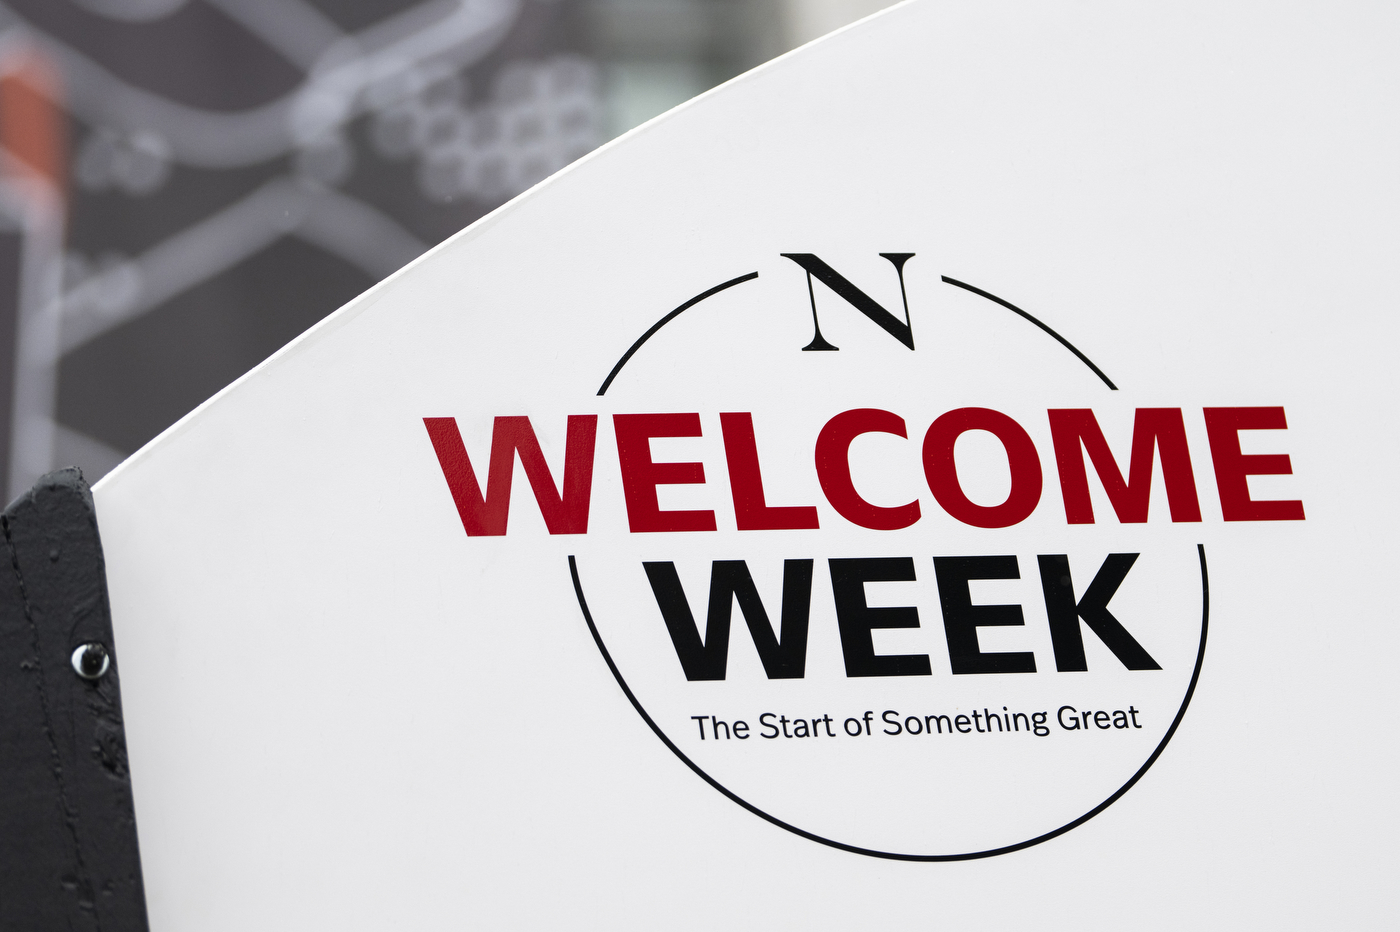 A white board has black and red text over it: "Welcome Week: The Start of Something Great," for Northeastern's Convocation.